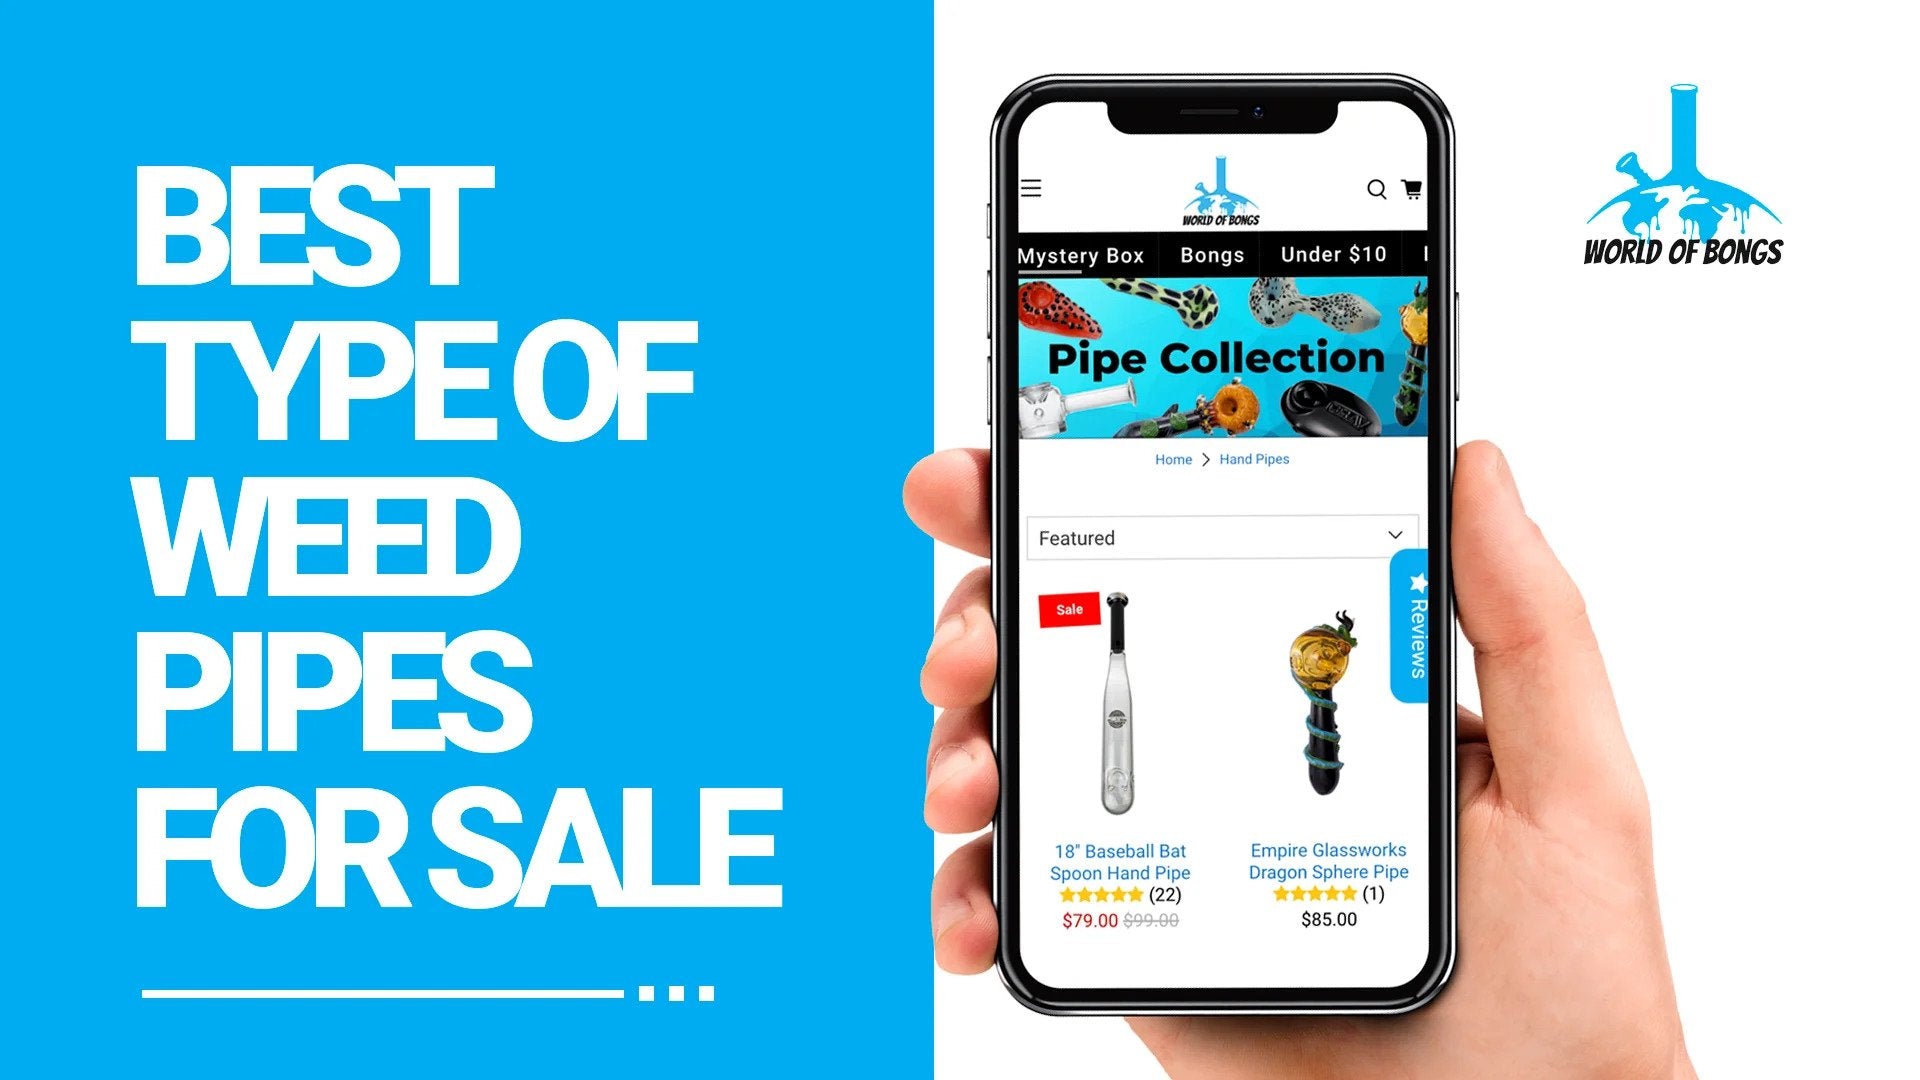 Top 10 Weed Pipe Options For Sale in 2023